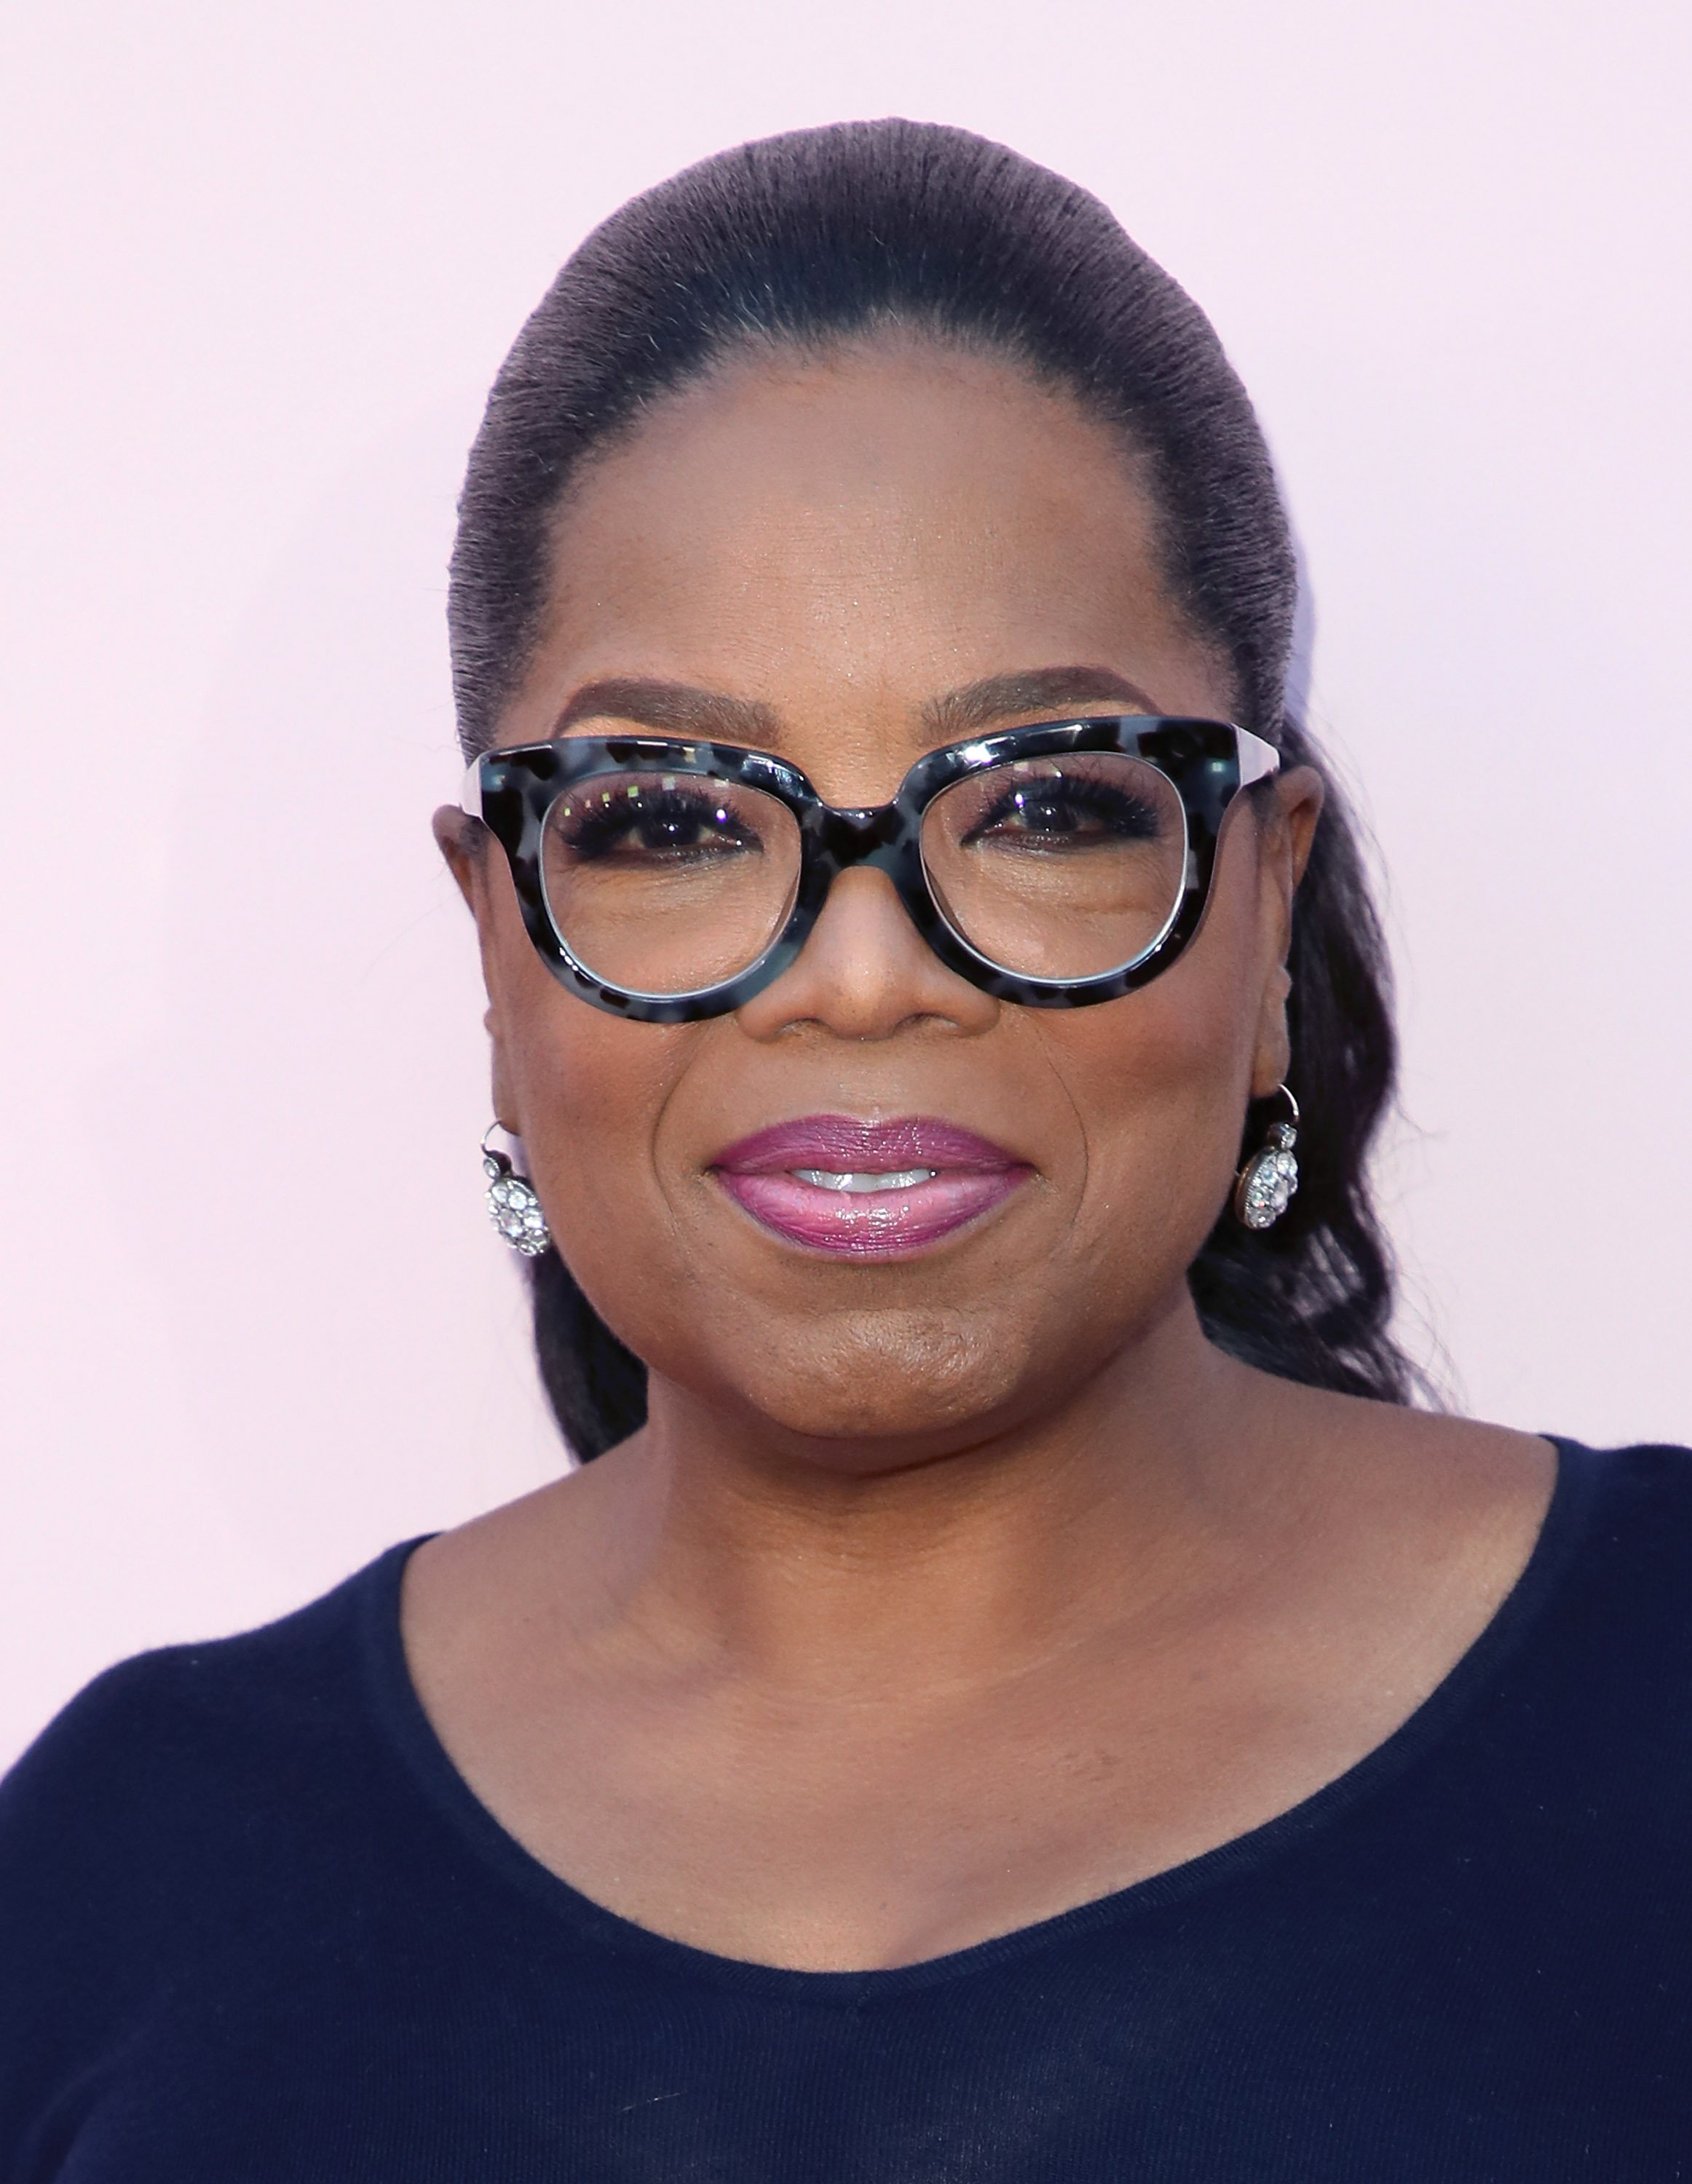 Oprah Winfrey attends the premiere of OWN's "Love Is_" at NeueHouse Hollywood on June 11, 2018. | Photo: GettyImages